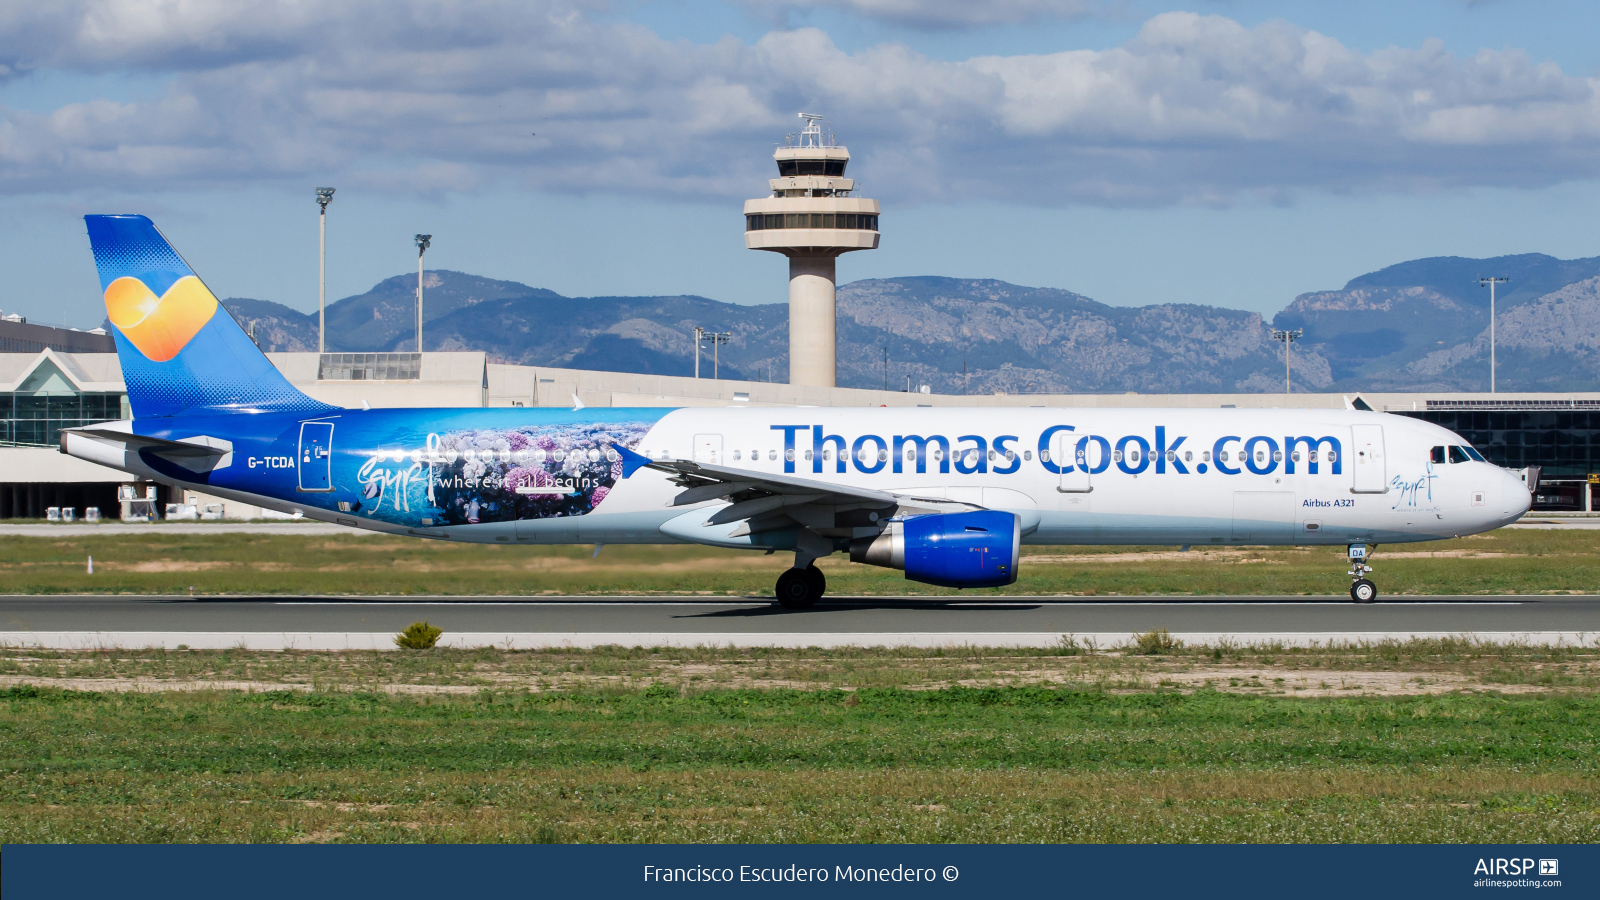 Thomas Cook Airlines  Airbus A321  G-TCDA